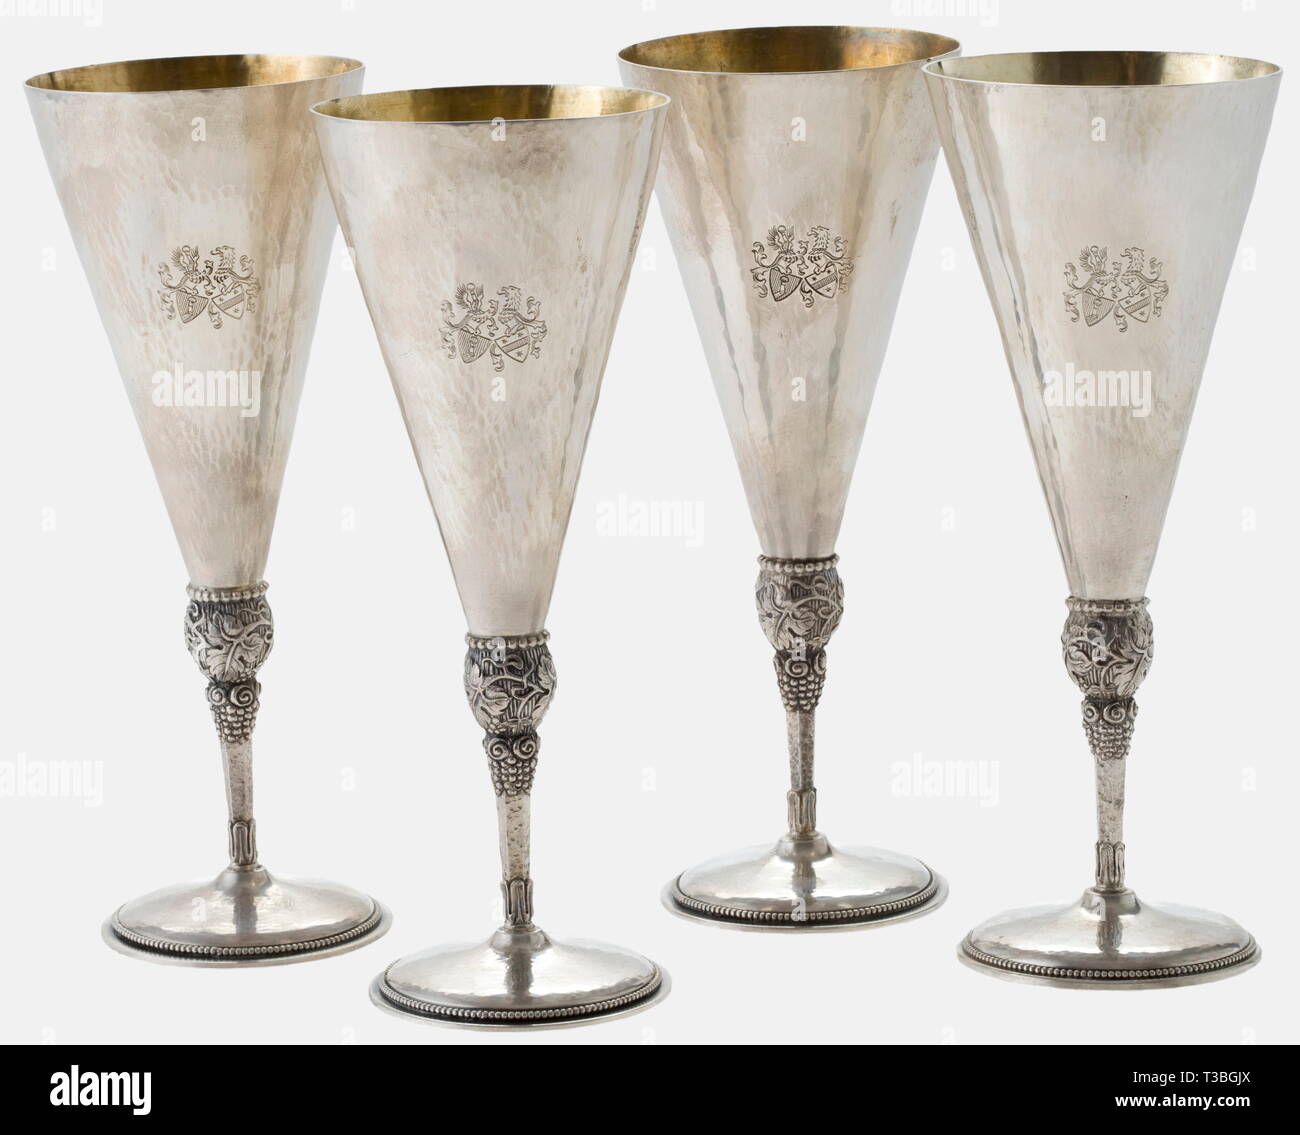 Hermann Göring and Emmy Sonnemann, four silver goblets, wedding gifts for the couple 1935 Hand-hammered silver, gilt interior, the obverse engraved with a alliance coat of arms. The stems with grape and vine leaf decoration in relief, the circular foot with the master's mark 'Kleemann' and hallmark '925'. Height of each goblet 18 cm, weight between 172 and 178 g. historic, historical, 1930s, 20th century, NS, National Socialism, Nazism, Third Reich, German Reich, Germany, German, National Socialist, Nazi, Nazi period, fascism, vessel, vessels, object, objects, stills, clipp, Editorial-Use-Only Stock Photo